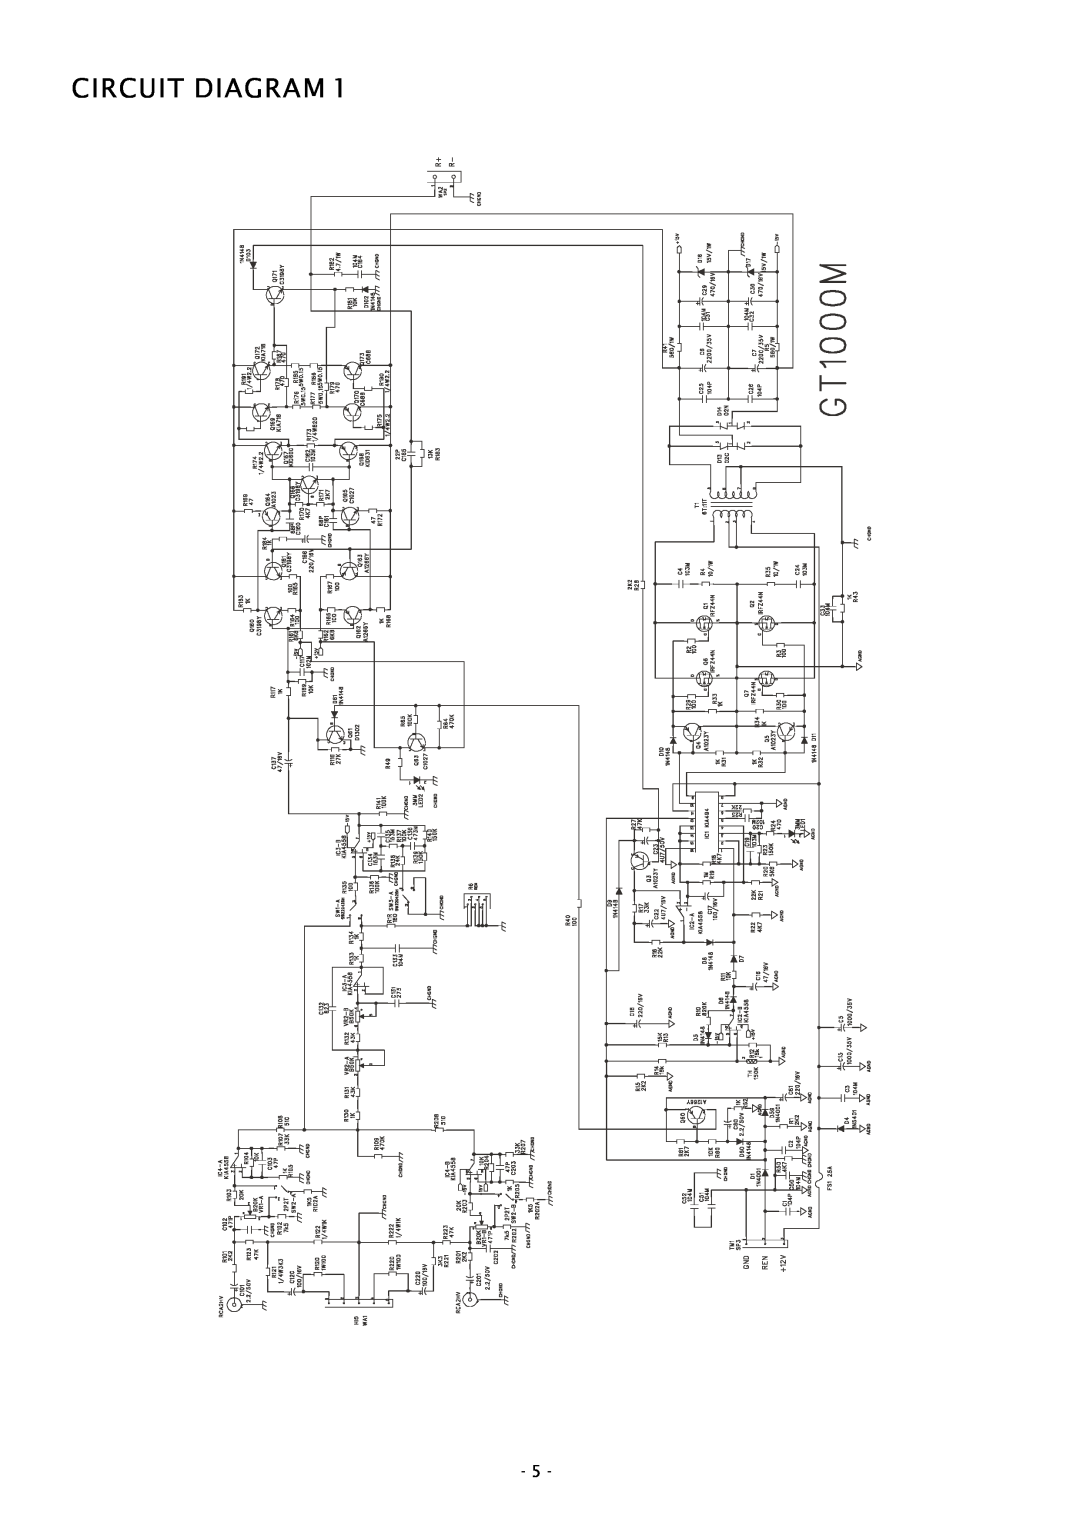 Boss Audio Systems GT1000M service manual Circuit Diagram 